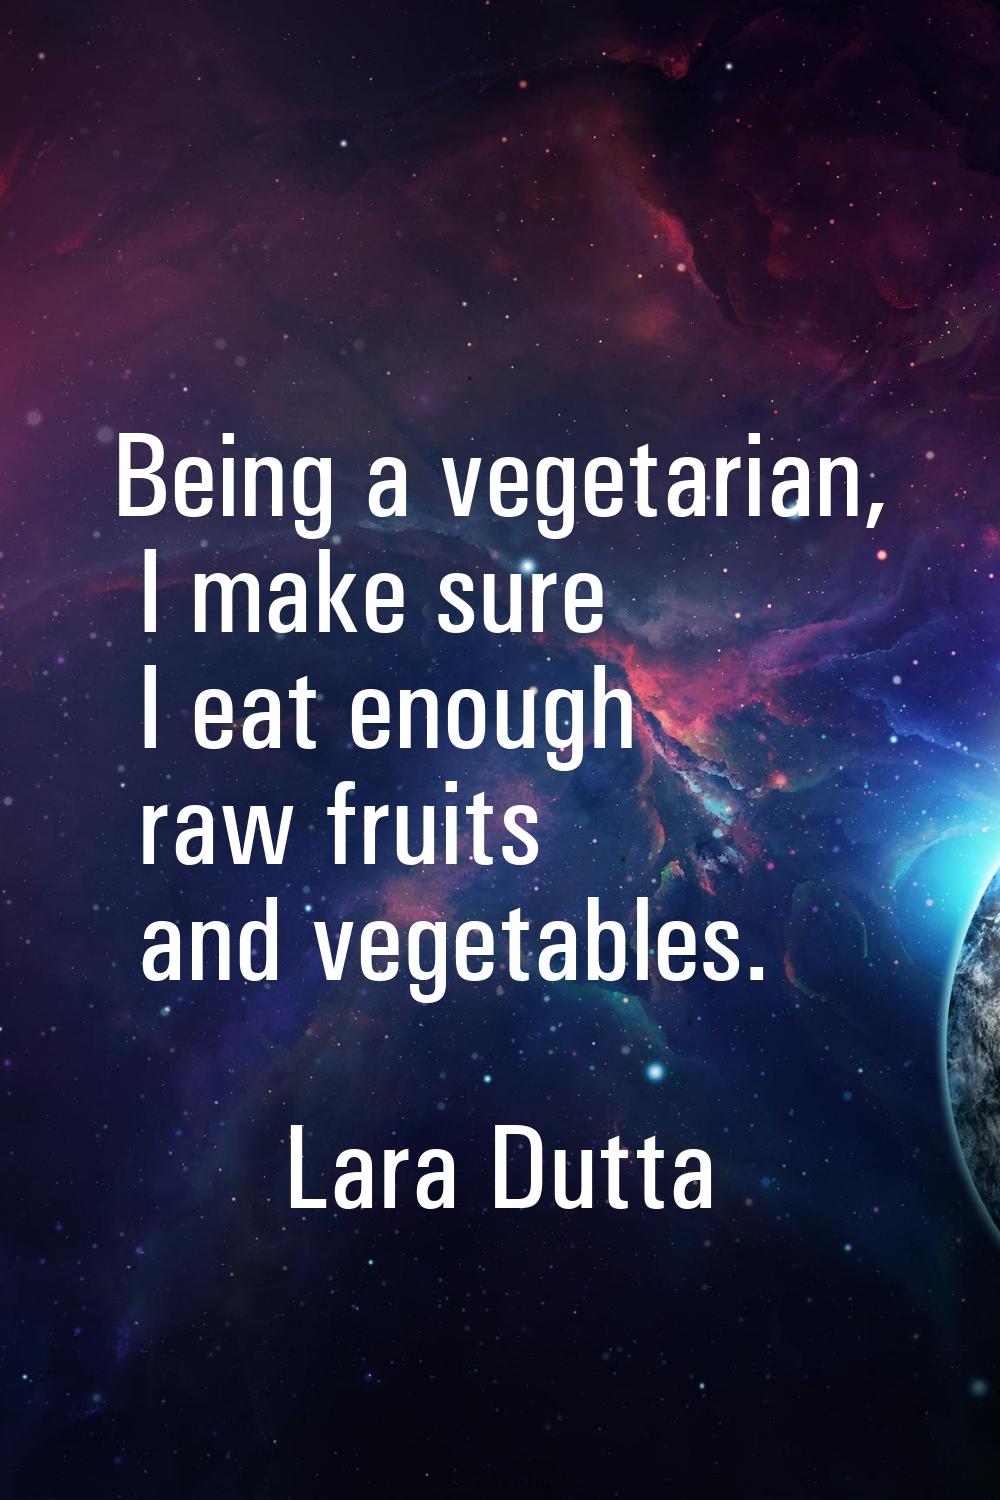 Being a vegetarian, I make sure I eat enough raw fruits and vegetables.